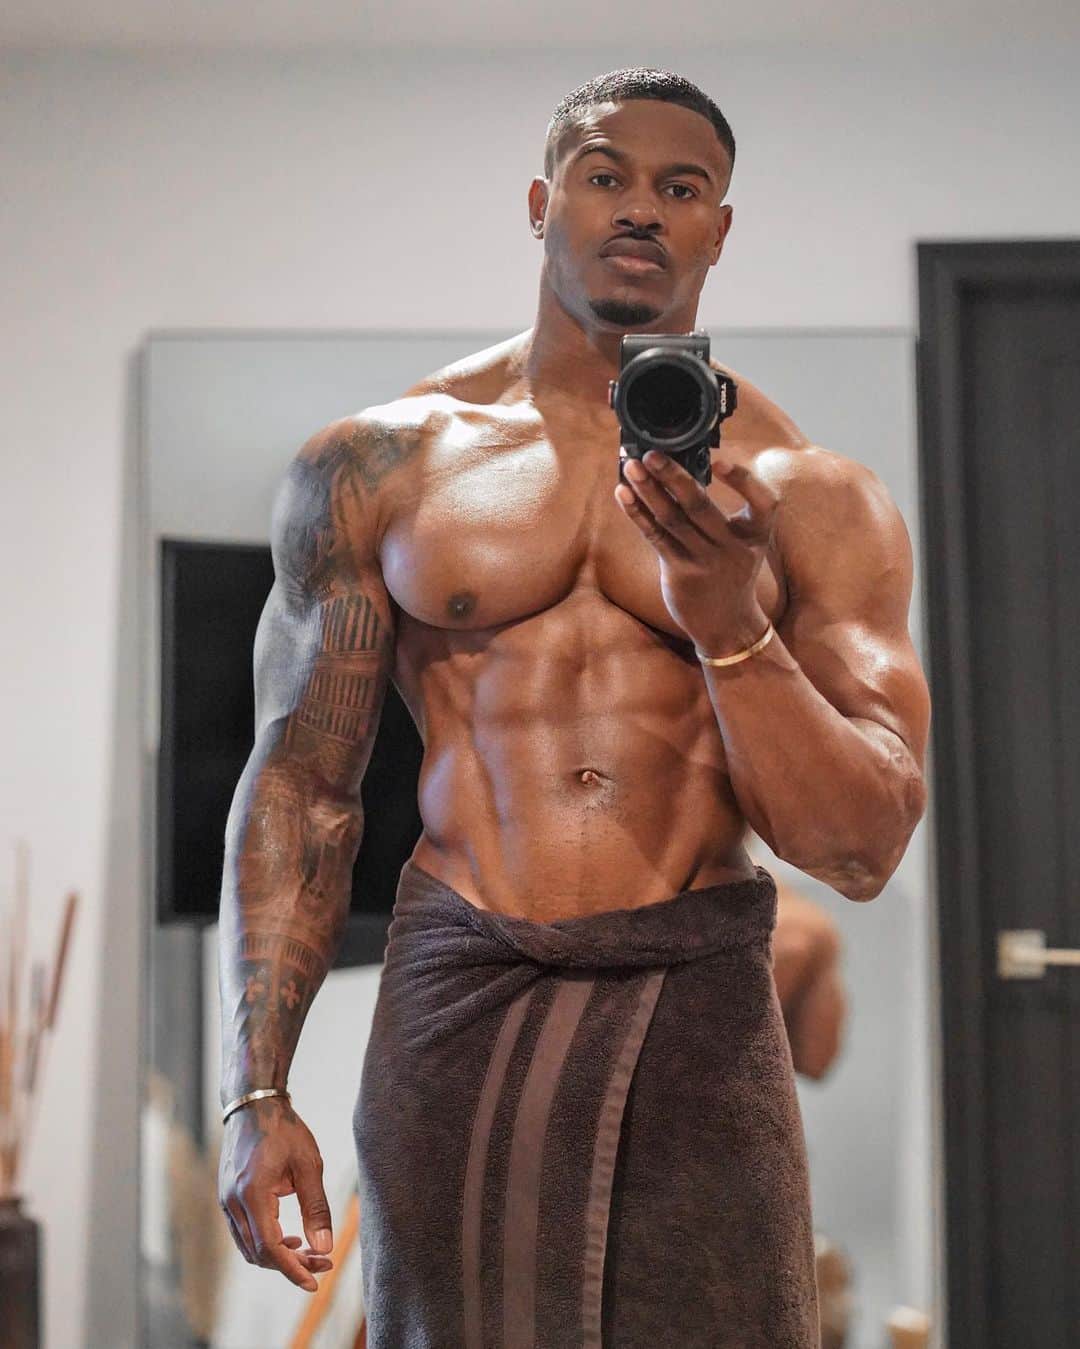 Simeon Pandaのインスタグラム：「Training is going great! Feeling real good about the momentum I’ve been at recently, and I’m seeing the improvements I’ve been working towards 💪🏾 I liked what I saw this morning, thought I’d share,  honest caption no b.s.」